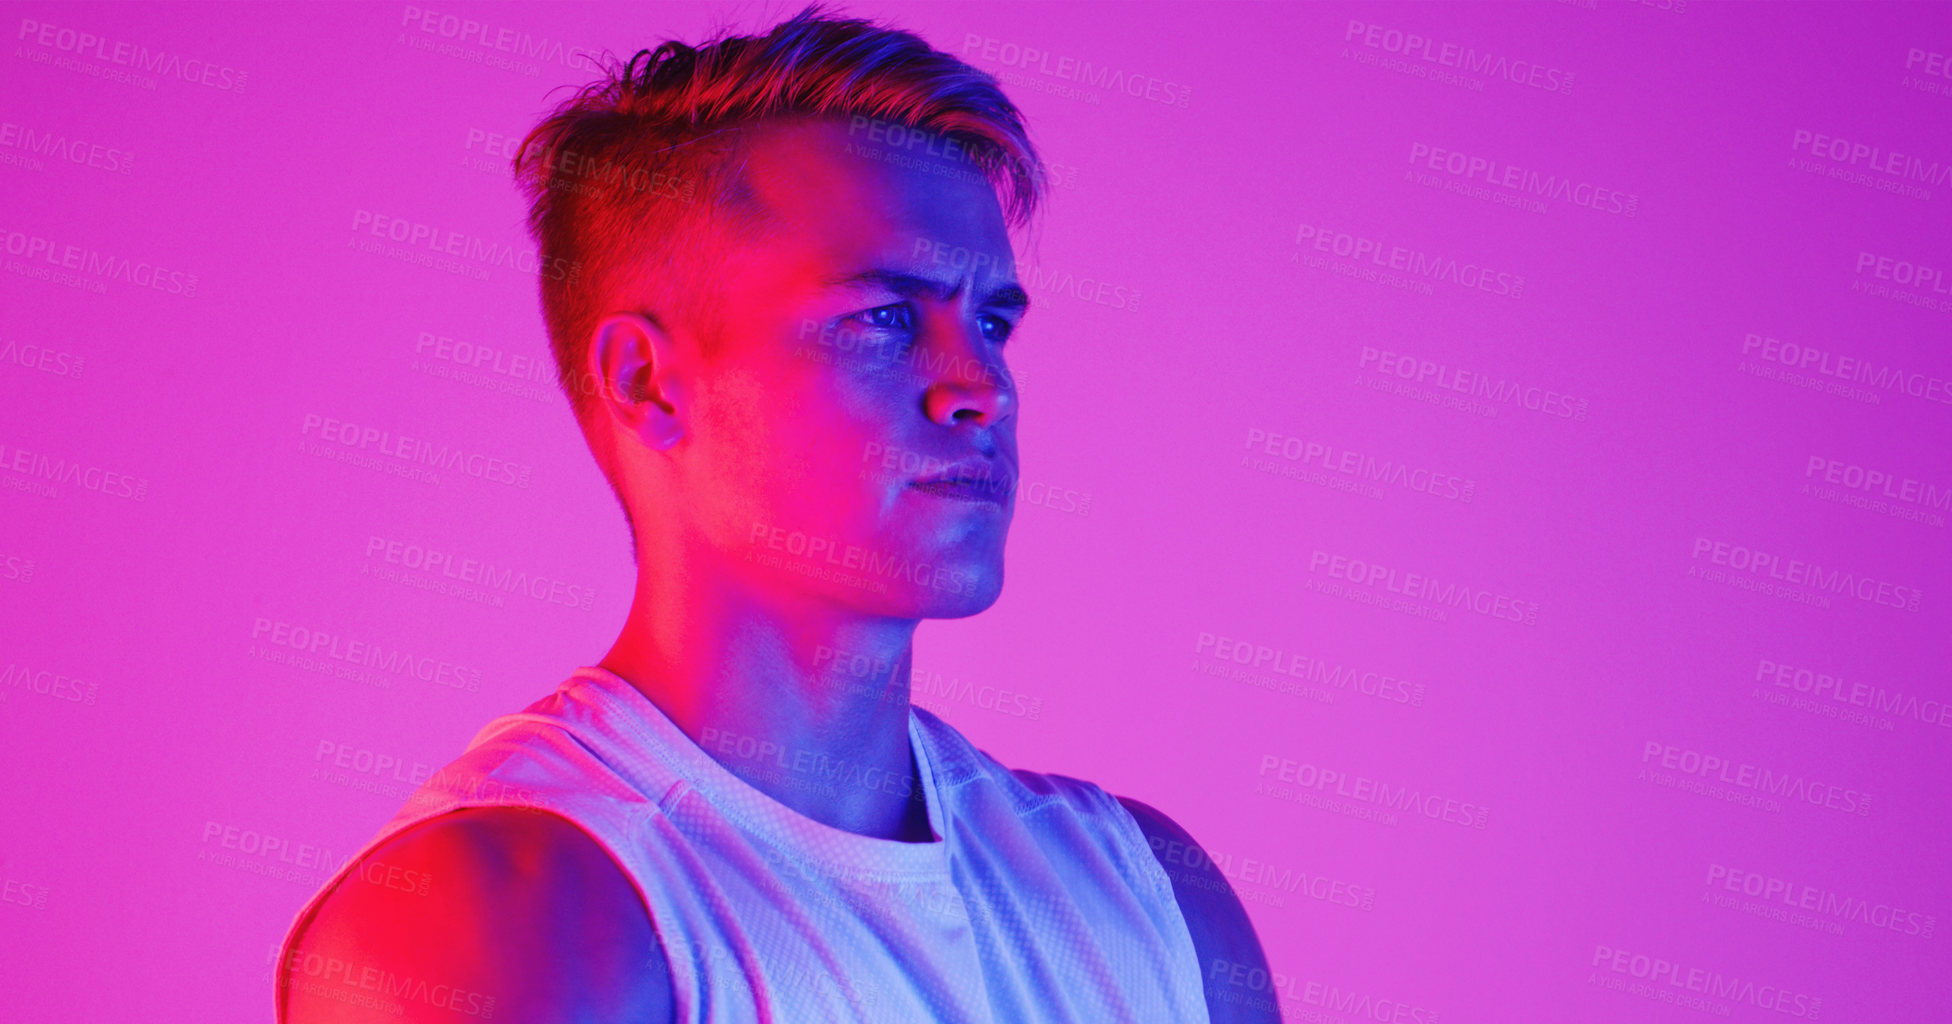 Buy stock photo Studio shot of a handsome young man posing against a purple background